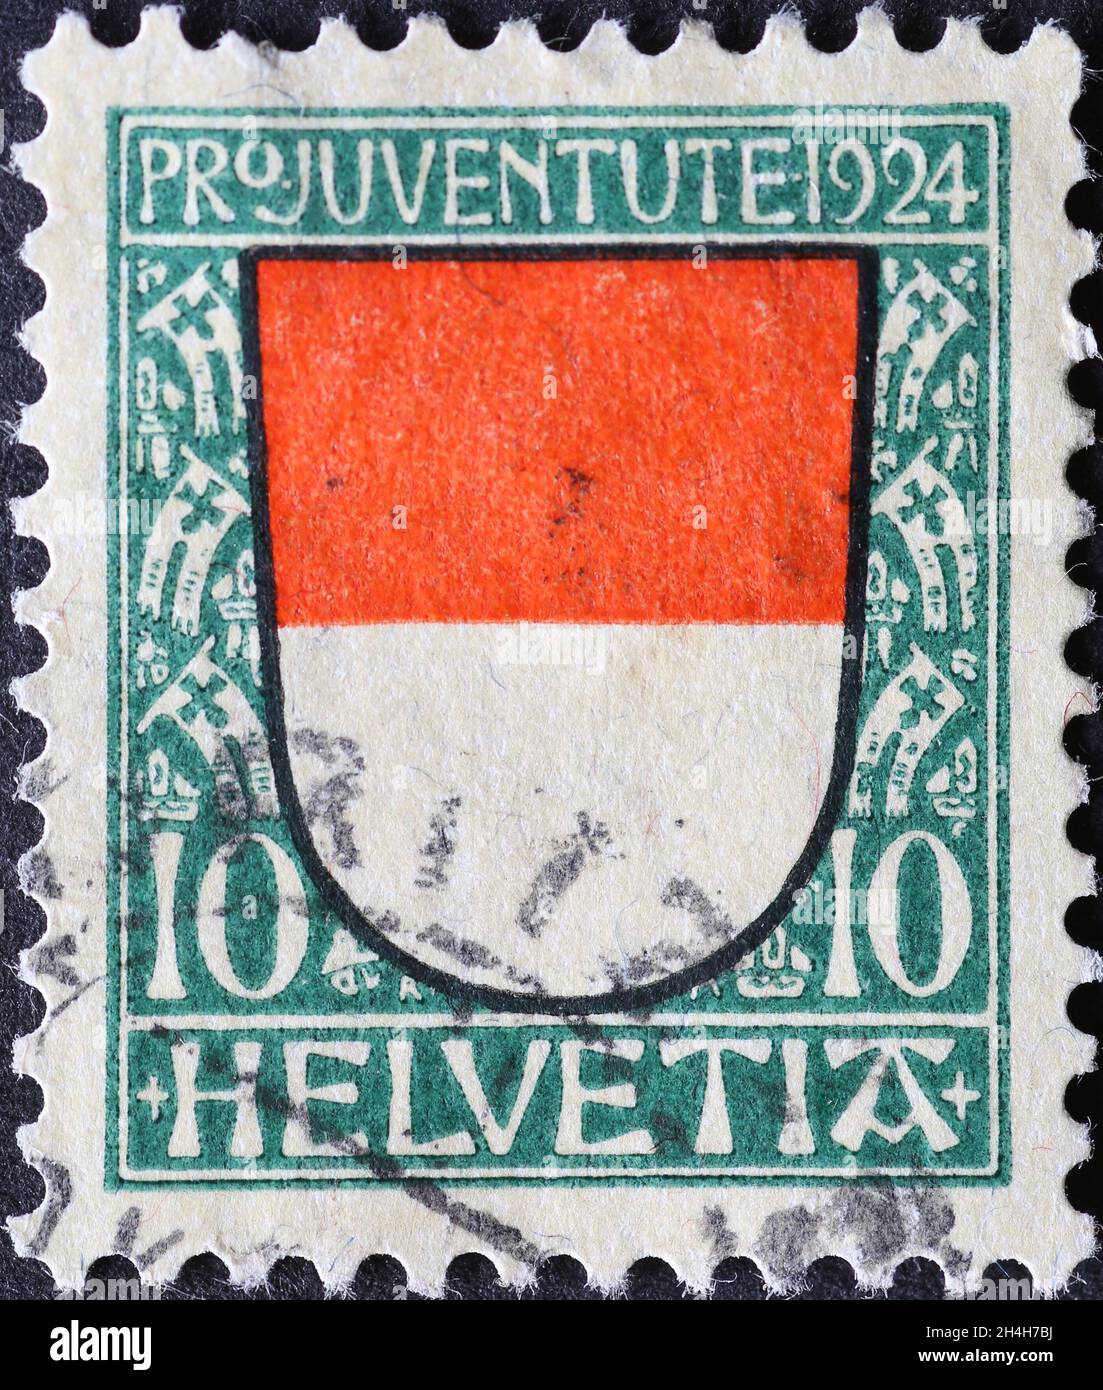 Switzerland - Circa 1924: a postage stamp printed in the Switzerland showing the red and white coat of arms of the Swiss canton of Solothurn on a char Stock Photo